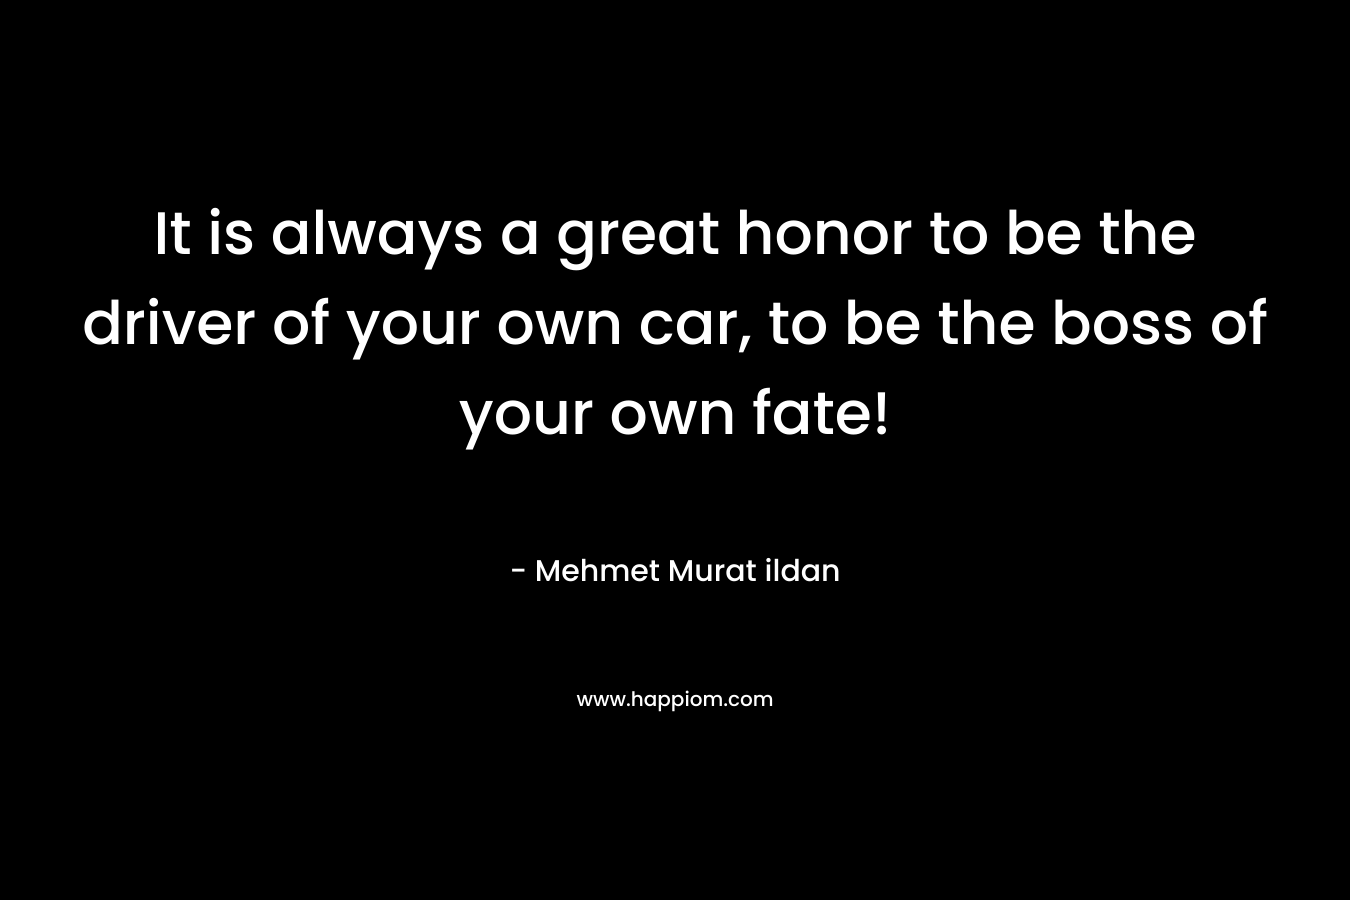 It is always a great honor to be the driver of your own car, to be the boss of your own fate! – Mehmet Murat ildan